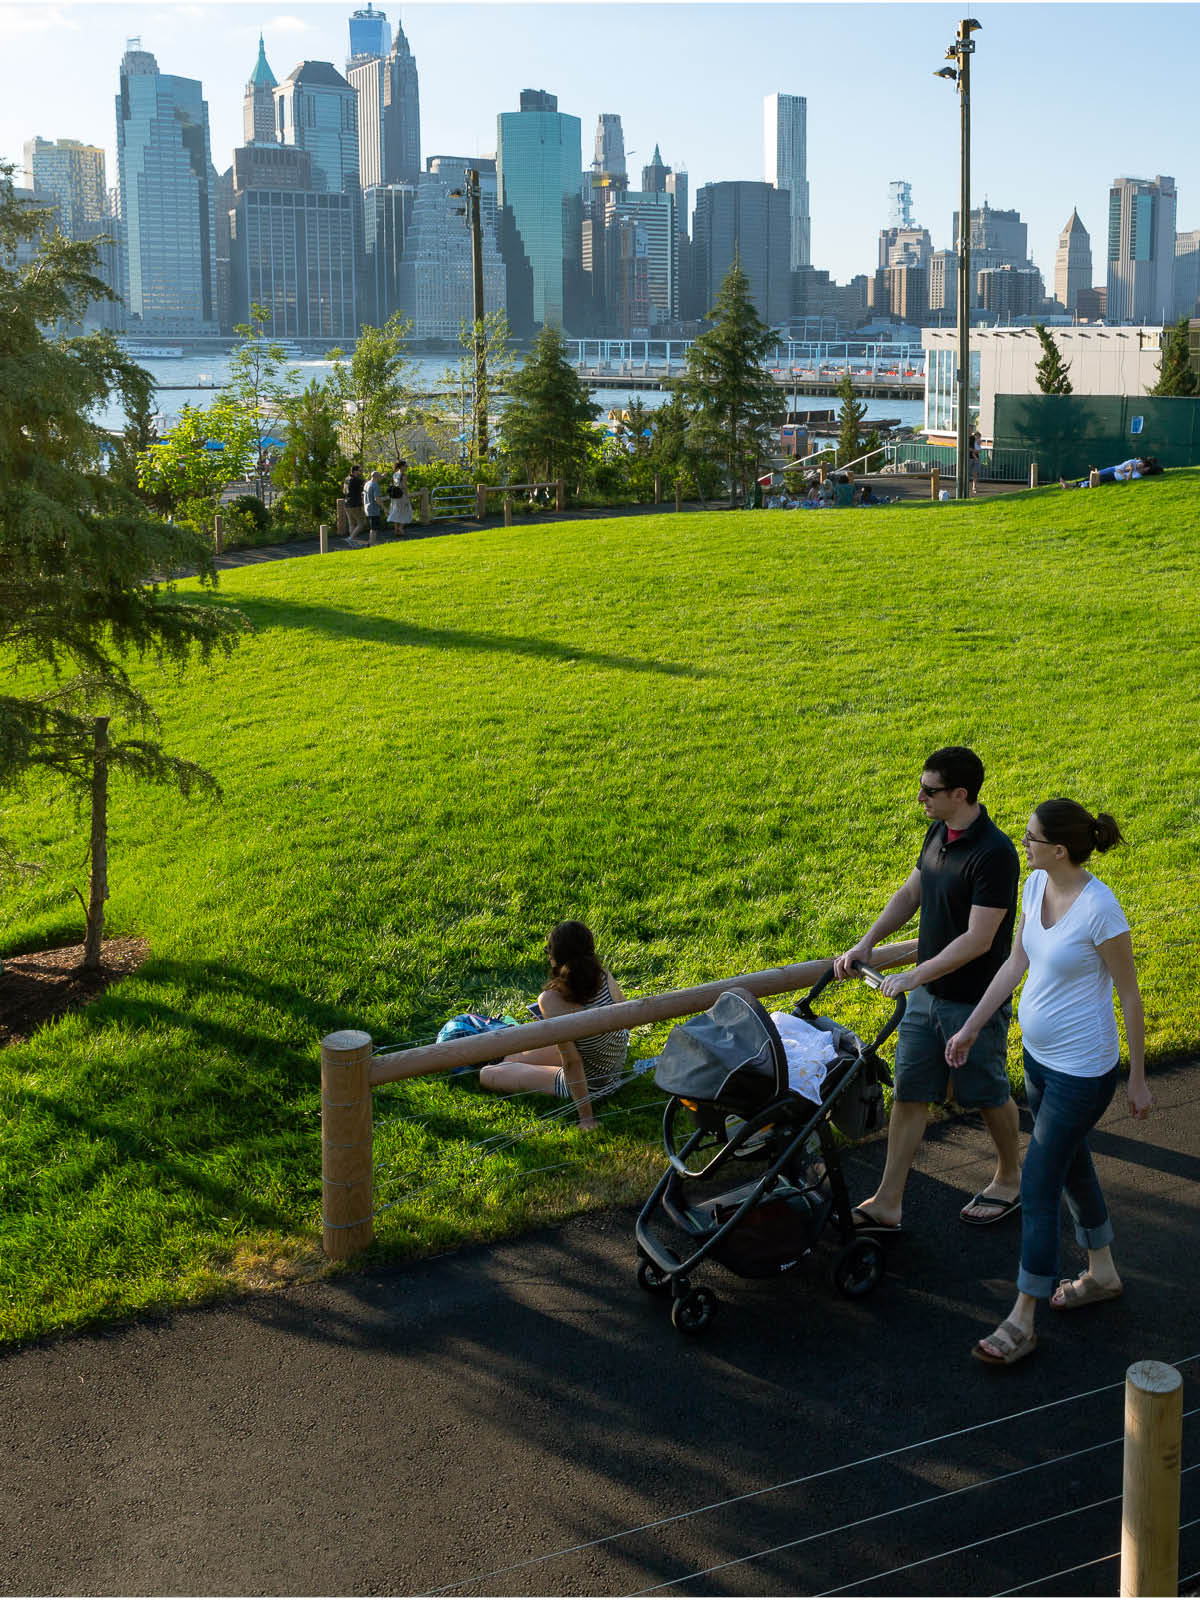 Couple walking with stroller down path beside a lawn at sunset. Lower Manhattan is seen in the background.